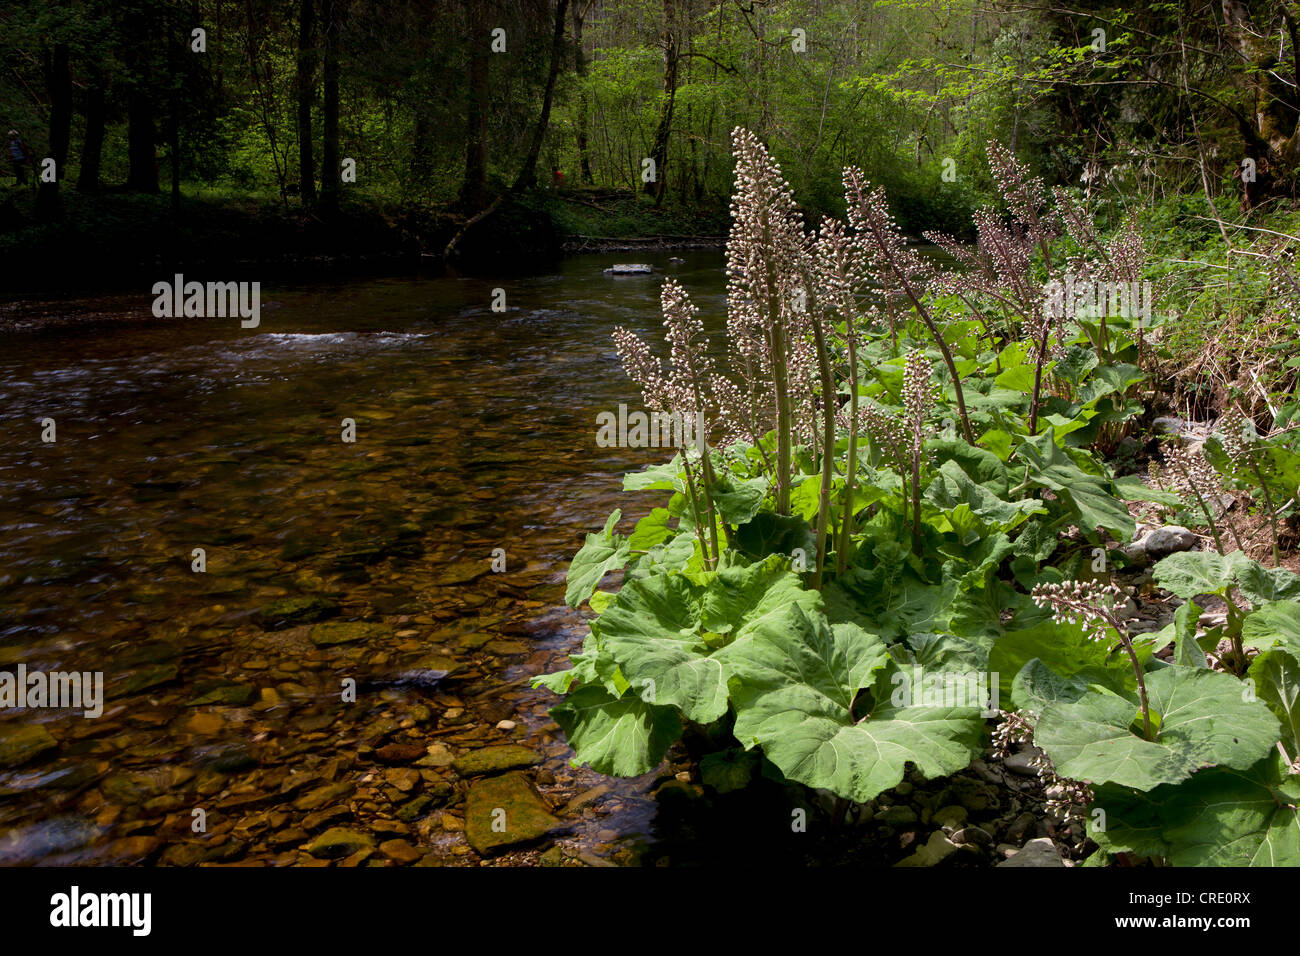 Butterbur (Petasites) in the Wutachschlucht gorge in the Black Forest, Baden-Wuerttemberg, Germany, Europe Stock Photo